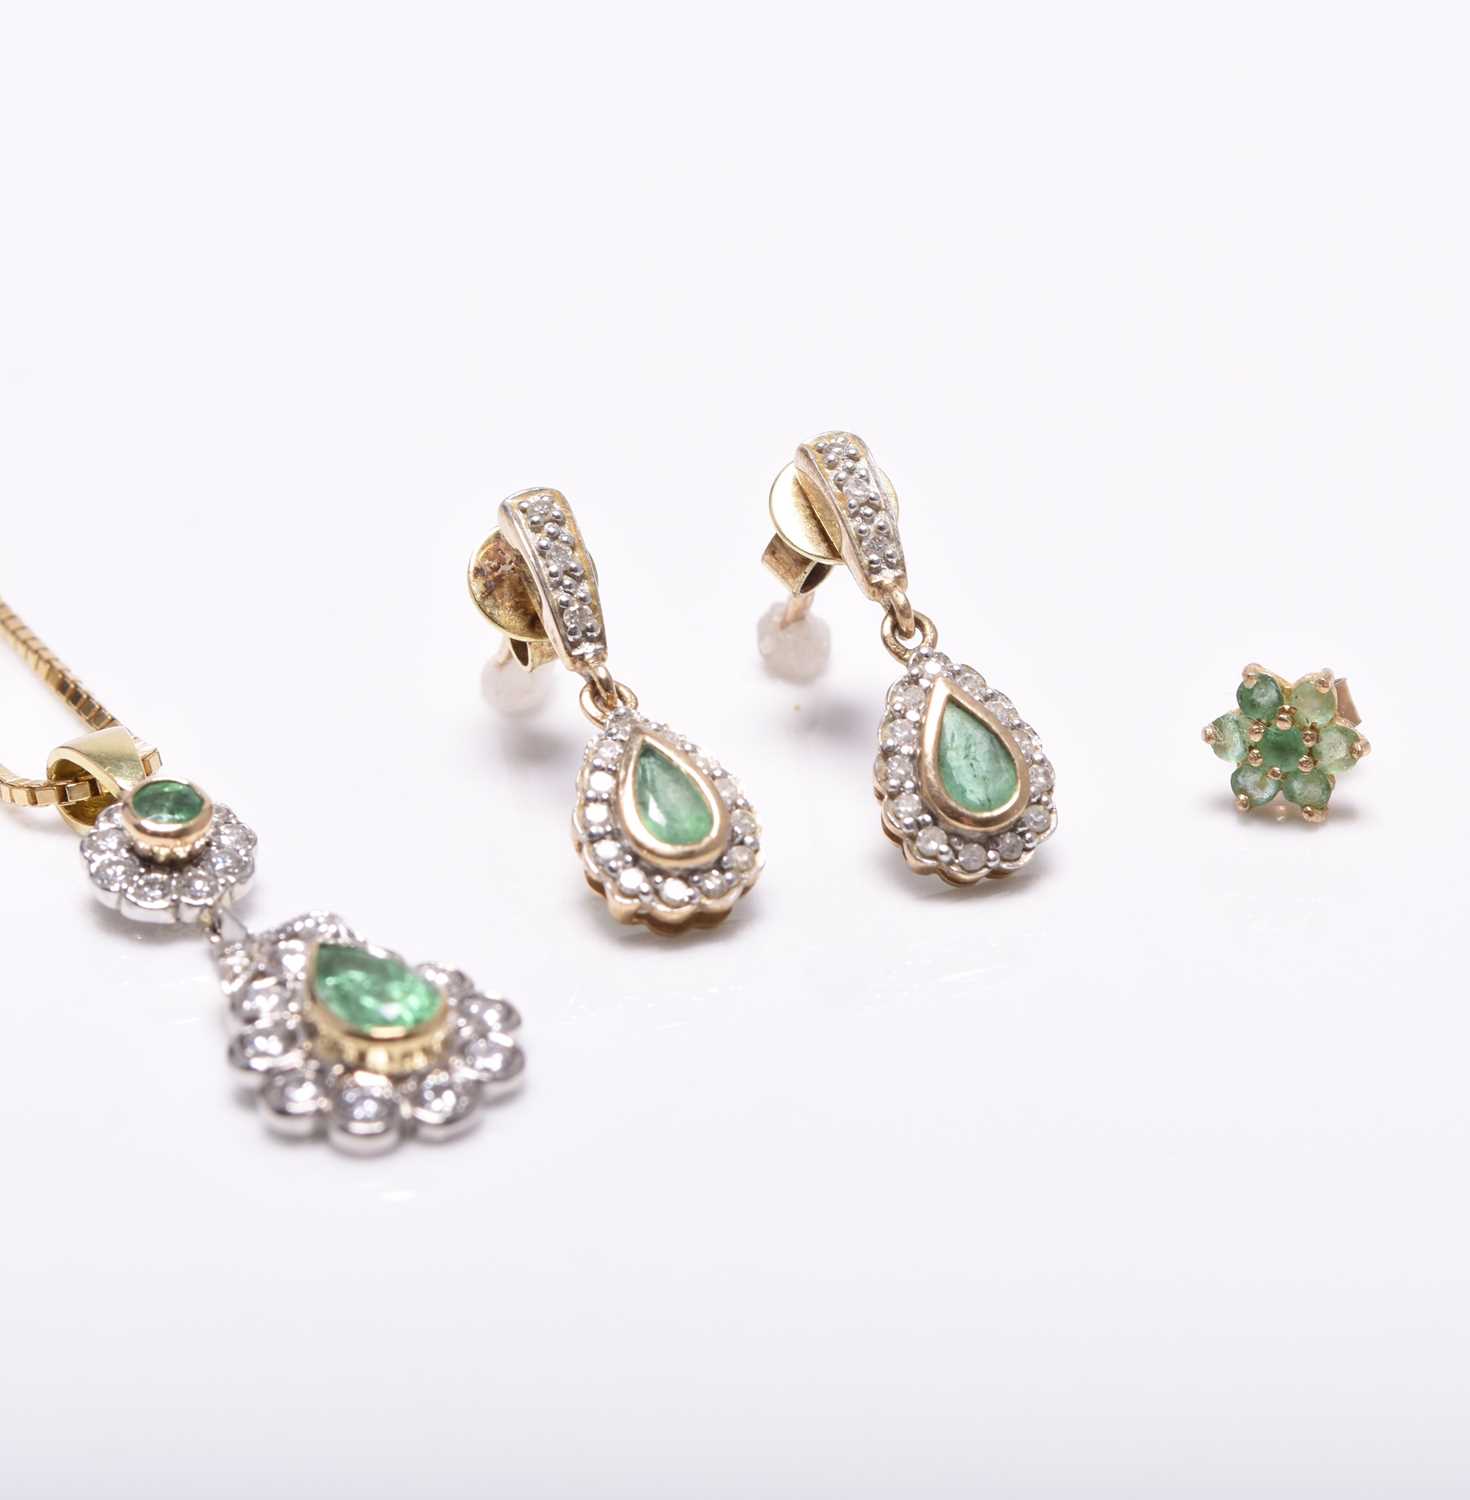 An emerald and diamond pendant on chain and a pair of earrings - Image 3 of 3